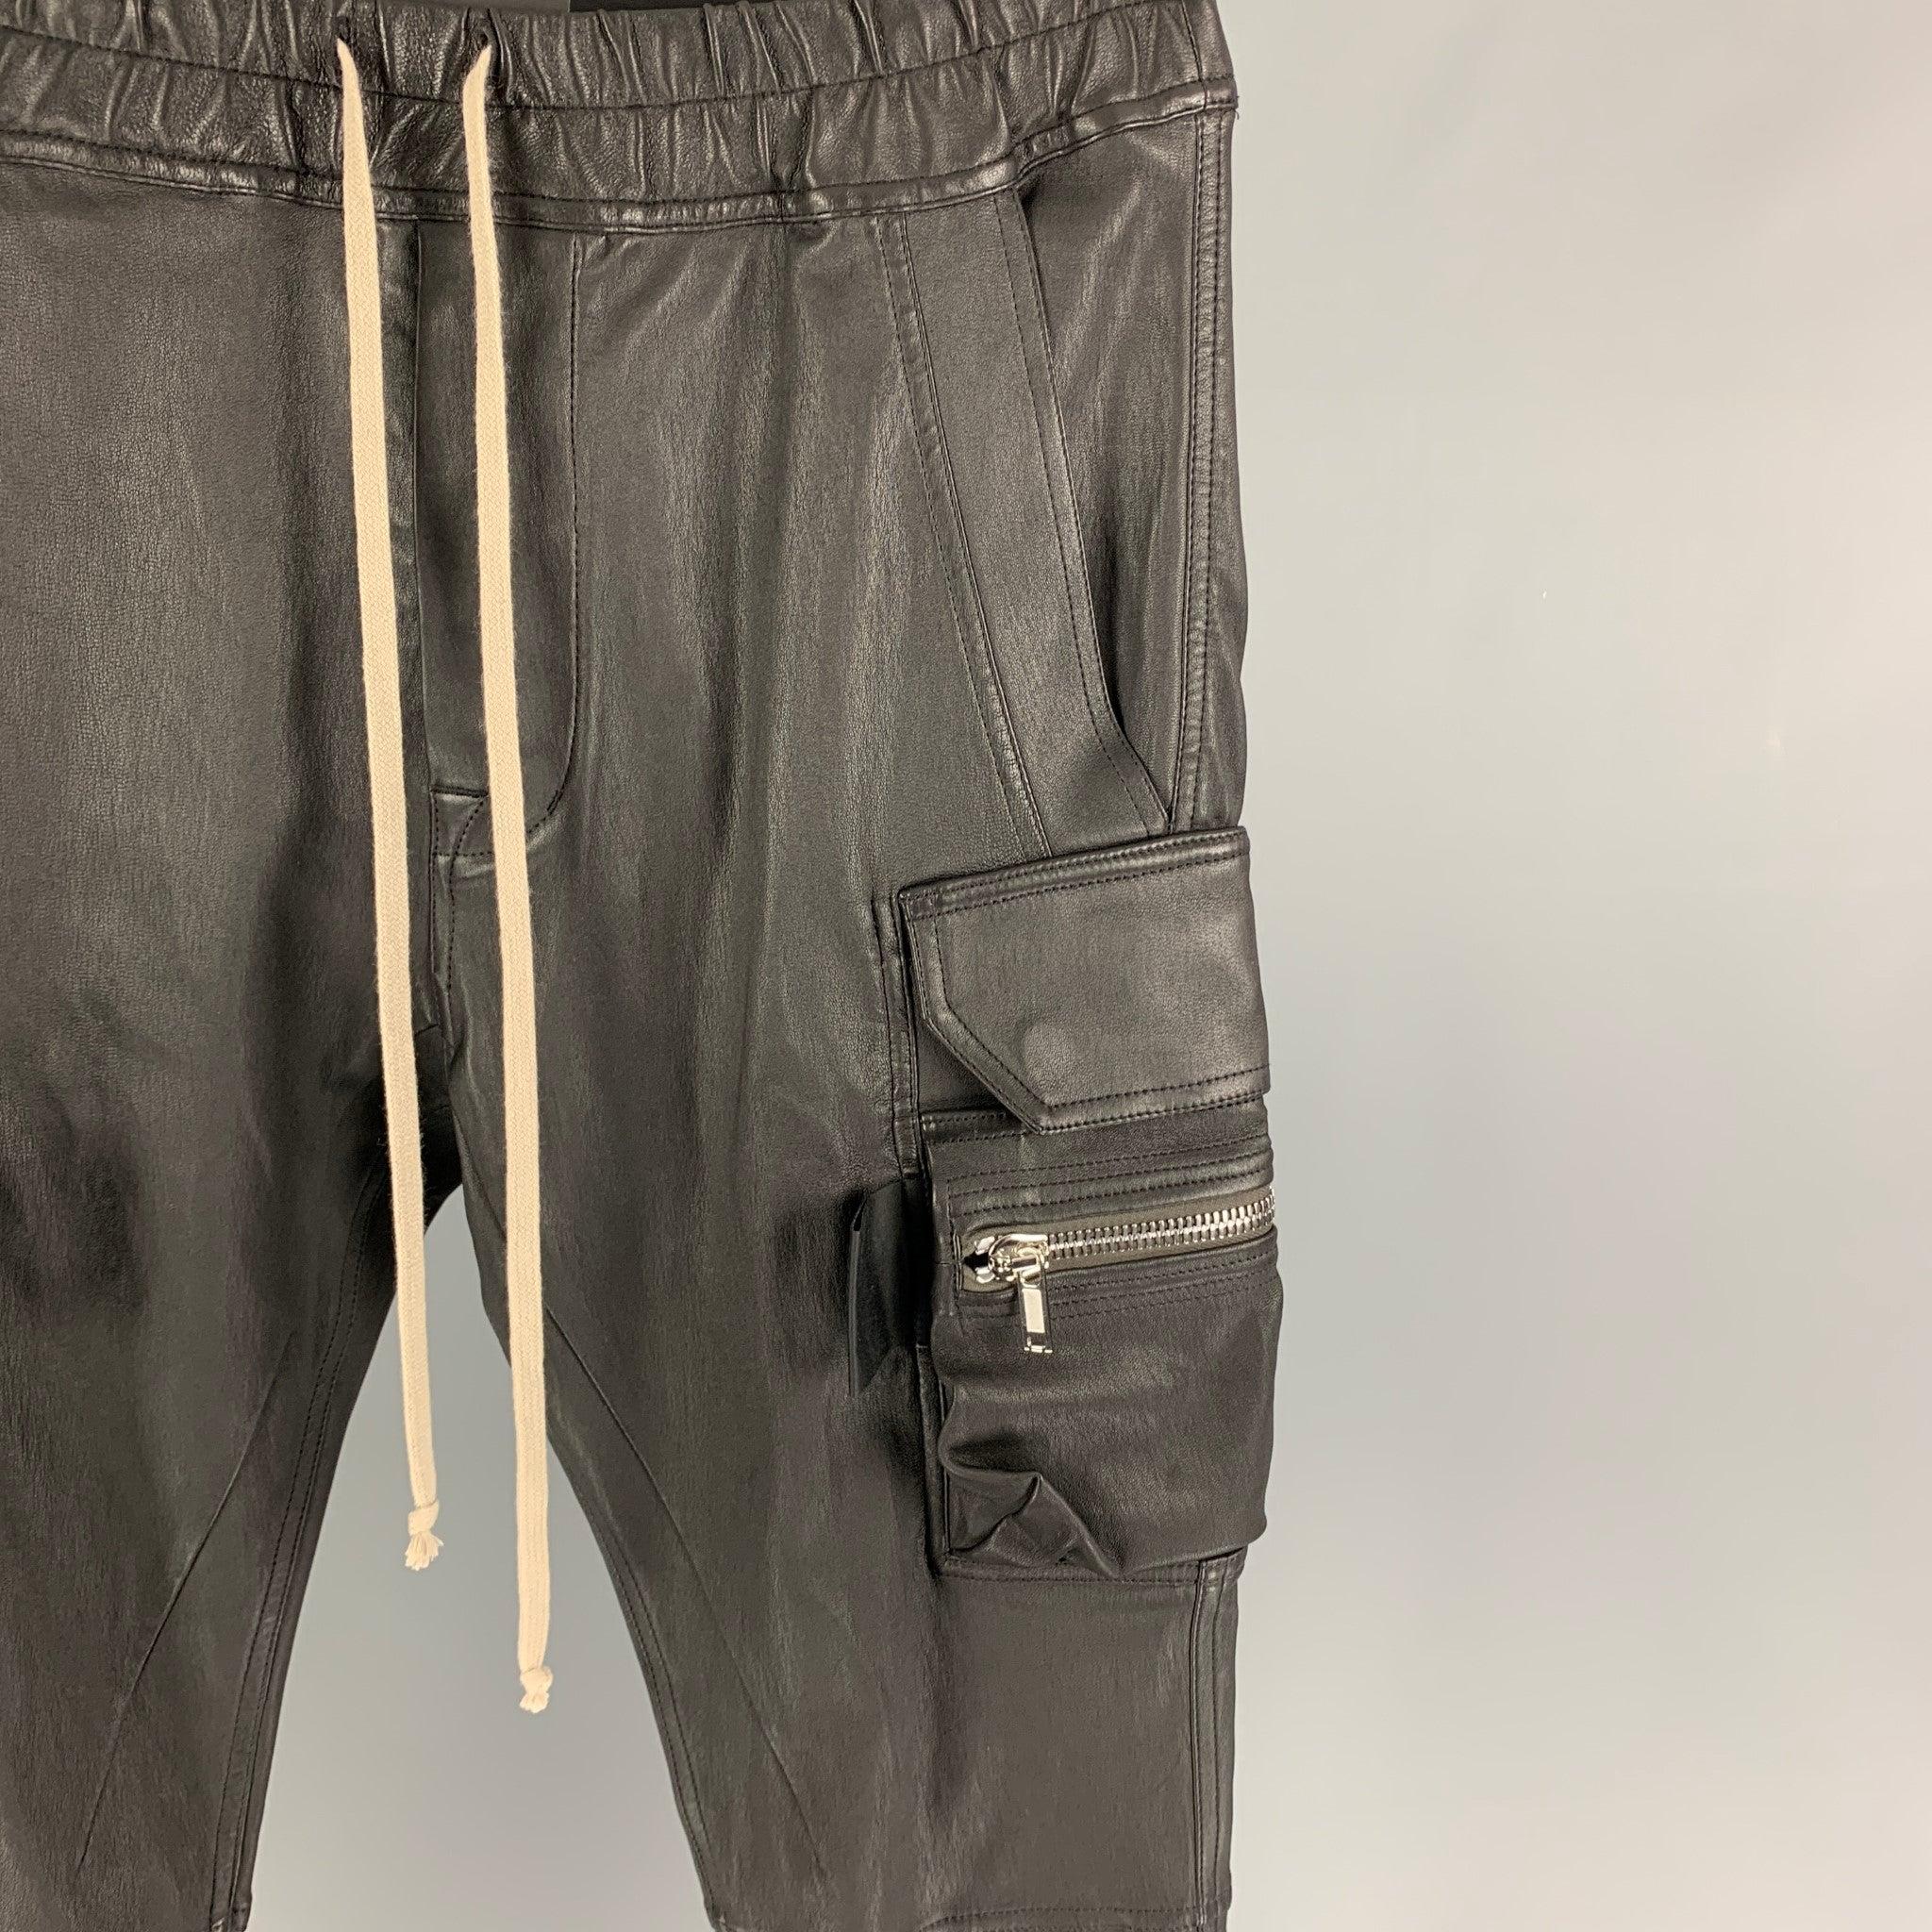 RICK OWENS Gethsemane FW 21 'Mastodon Cargo' pants comes in a black stretch leather blend featuring a slim-fit, silver tone hardware, elastic waistband, drawstring, elastic cuffs, and a snap button fly closure. Made in Italy.
New with tags.
